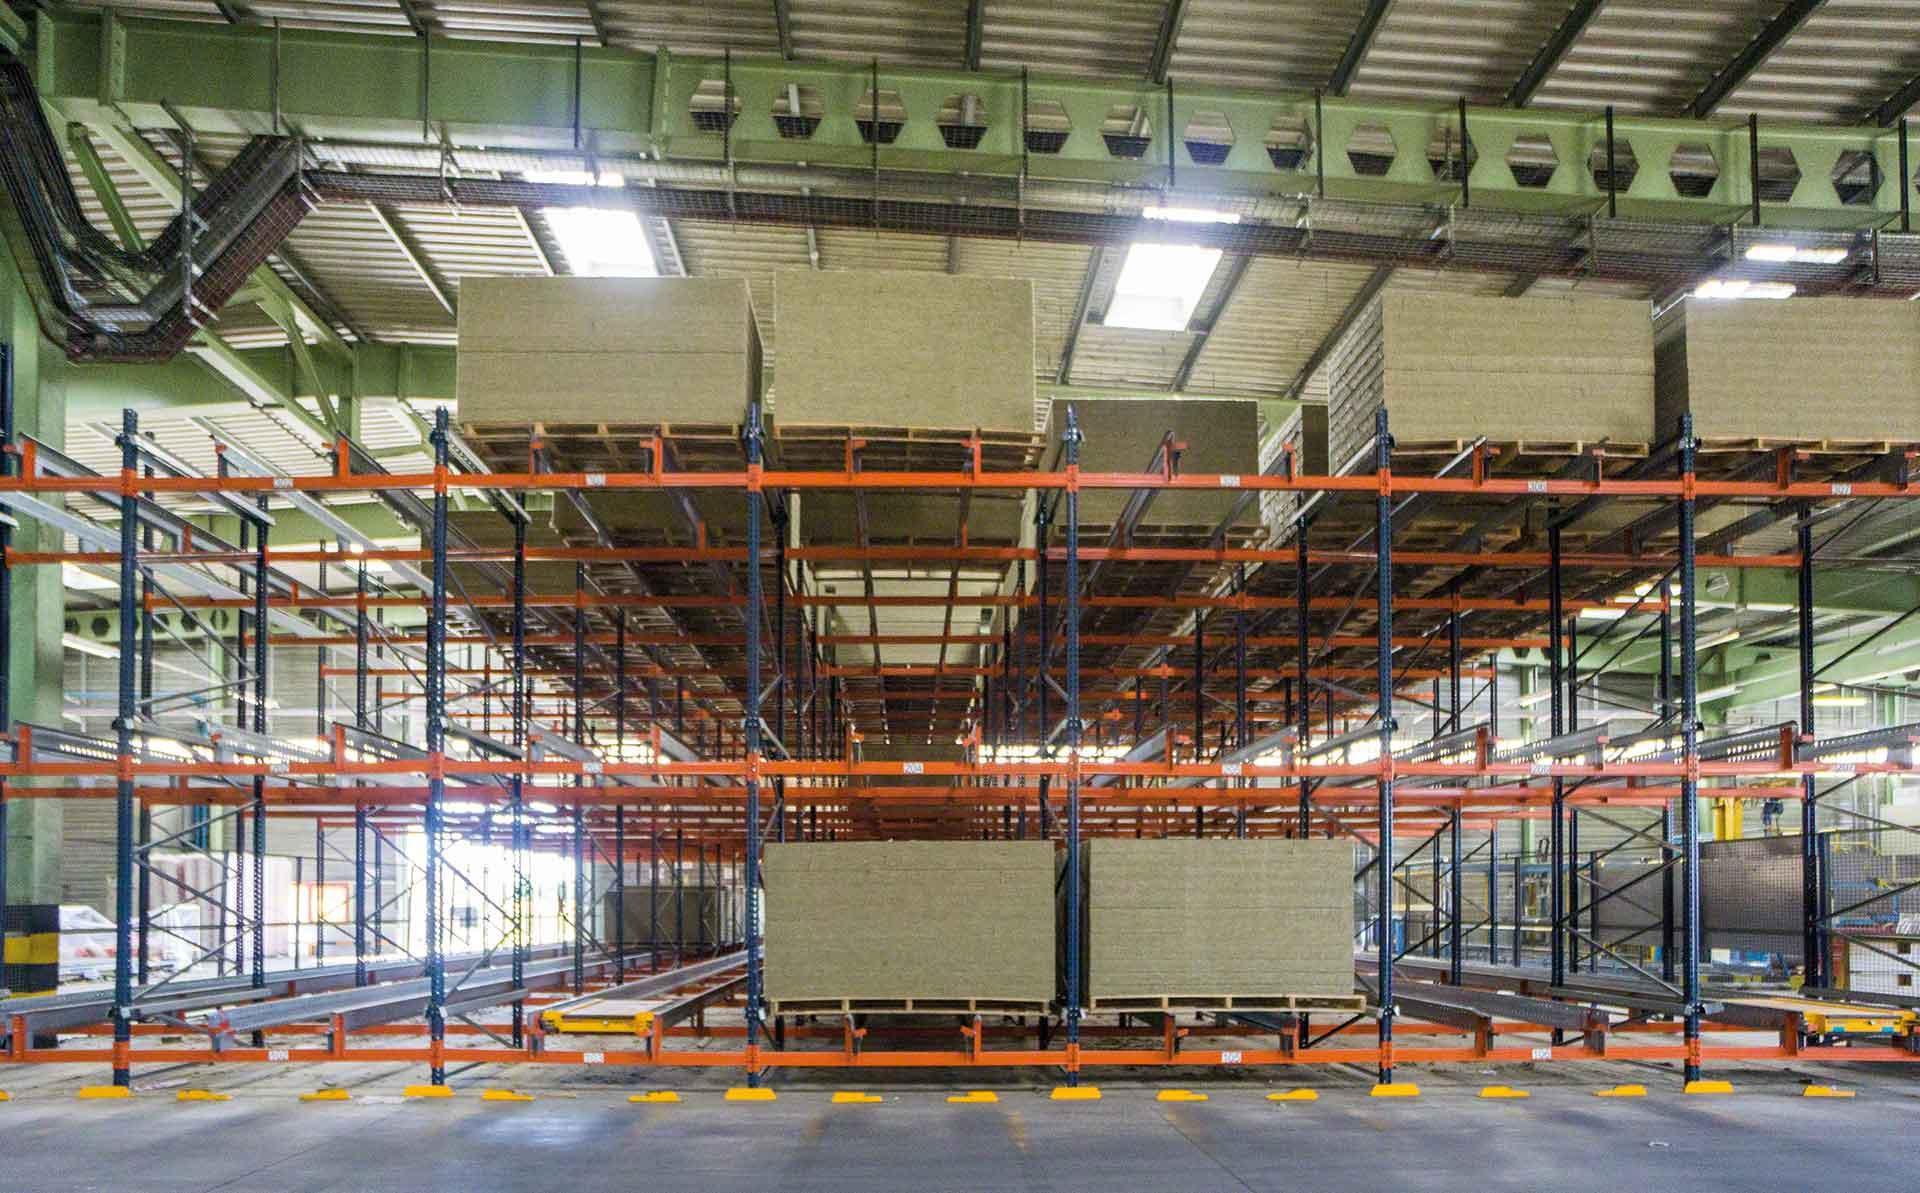 The partnership between high-density pallet rack storage and the Pallet Shuttle makes it possible to handle bulky goods